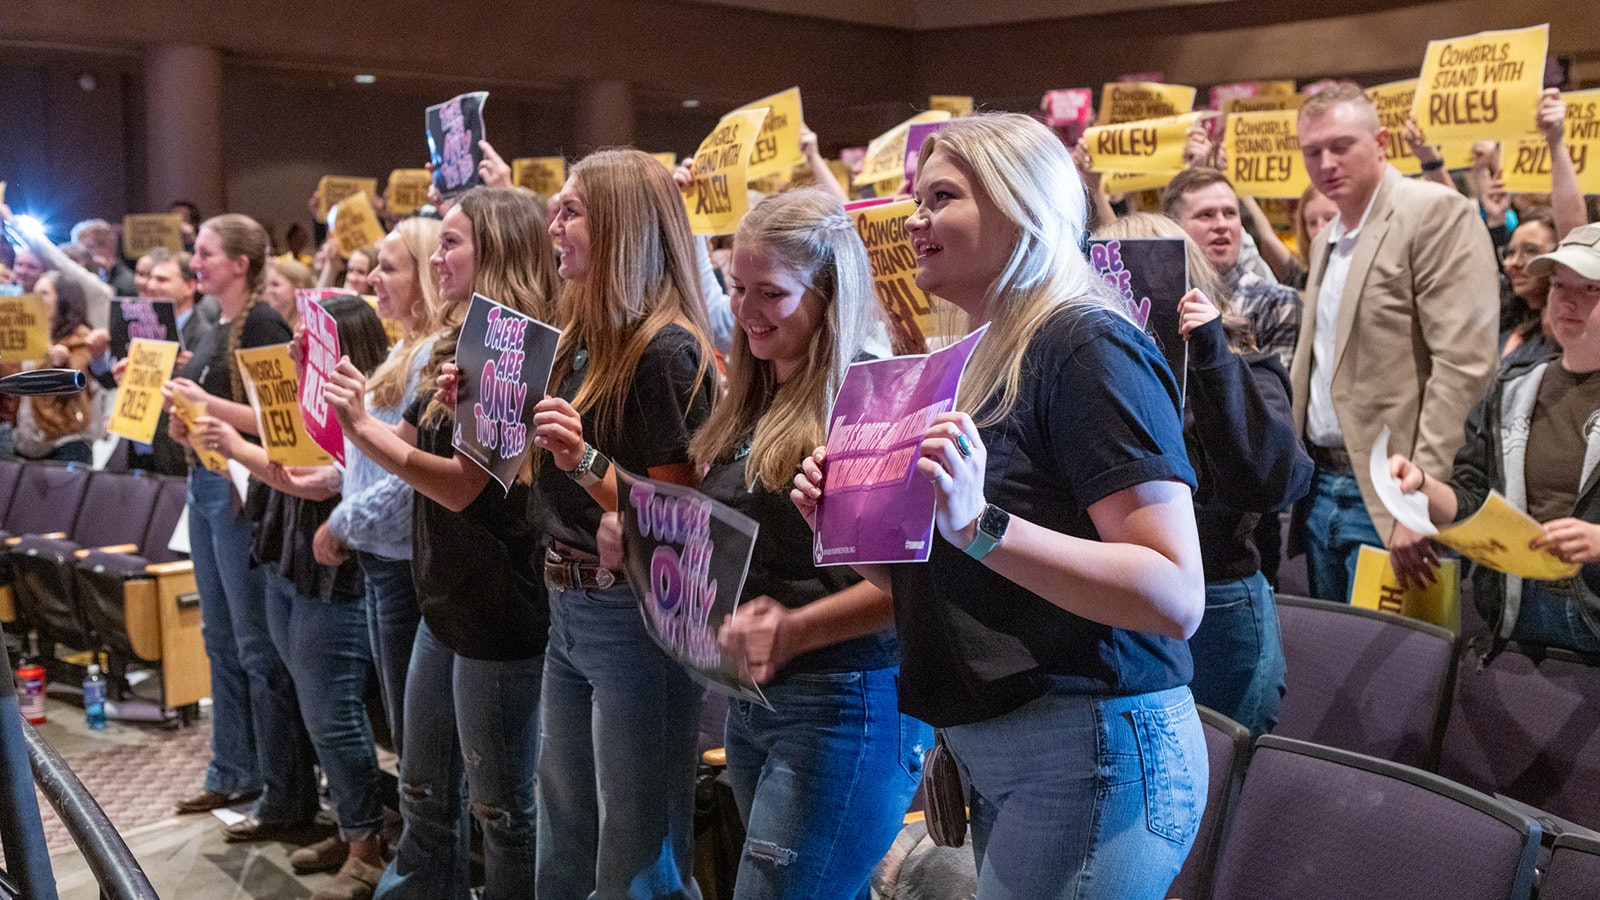 A large section of the crowd holds up "Cowgirls Stand With Riley" signs during Tuesdays event at the University of Wyoming in Laramie.